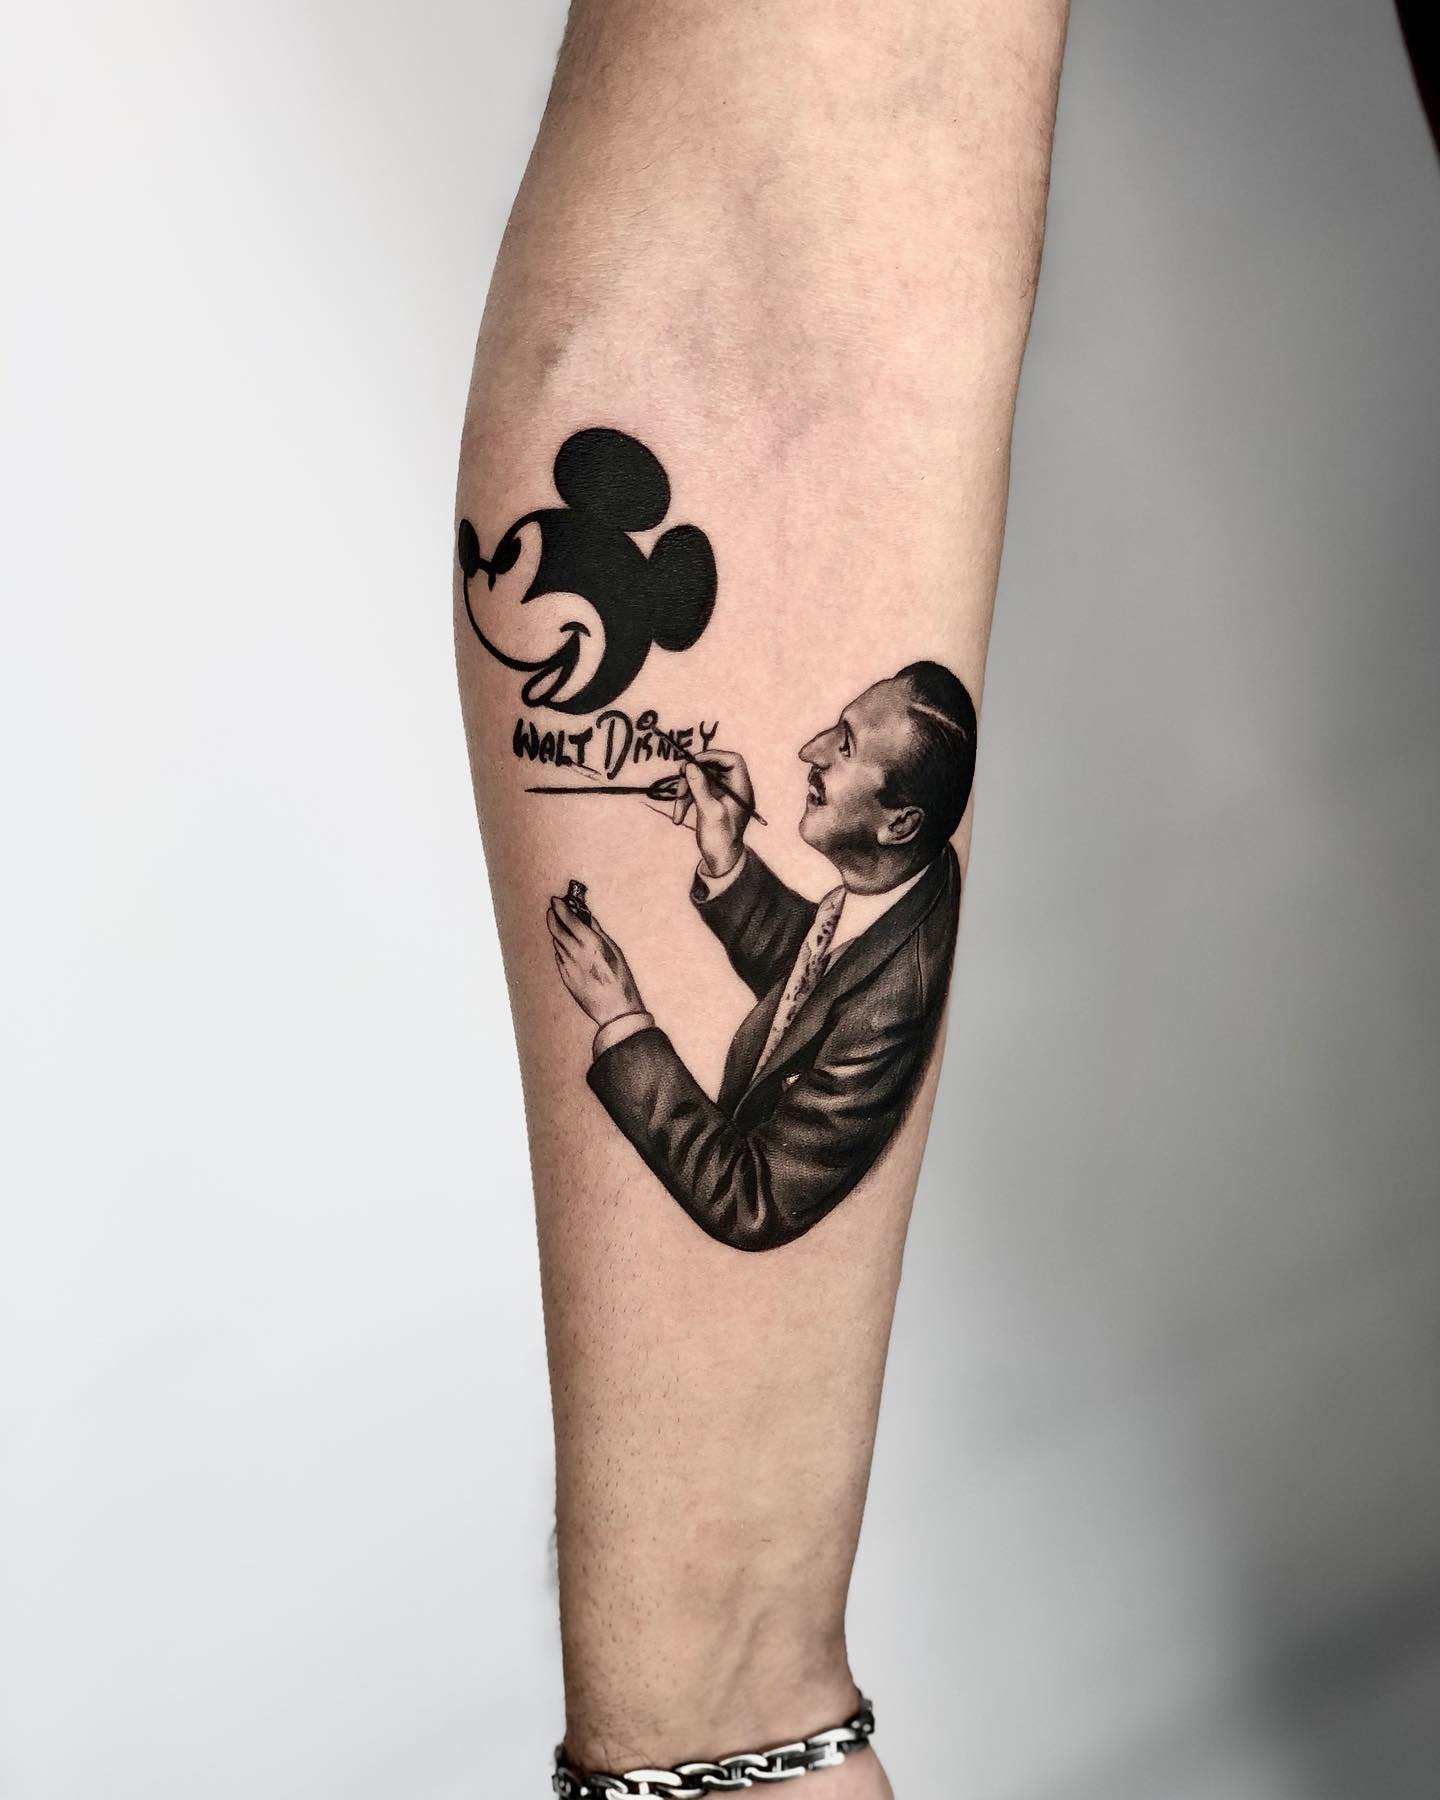 Mickey mouse tattoo – All Things Tattoo